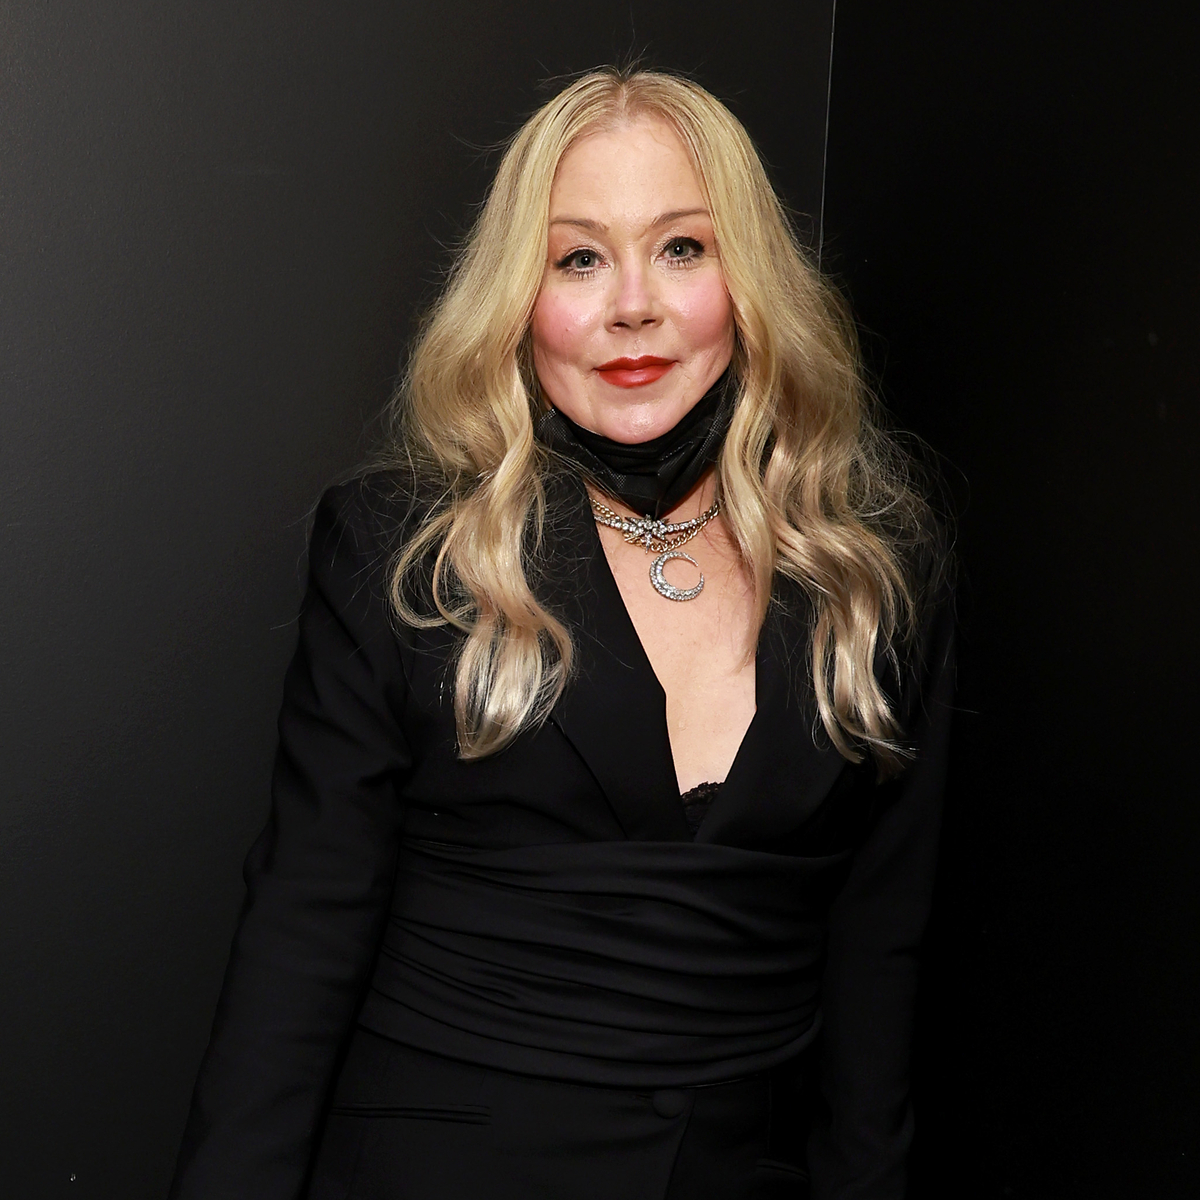 Christina Applegate Details the “Only Plastic Surgery” She Had Done